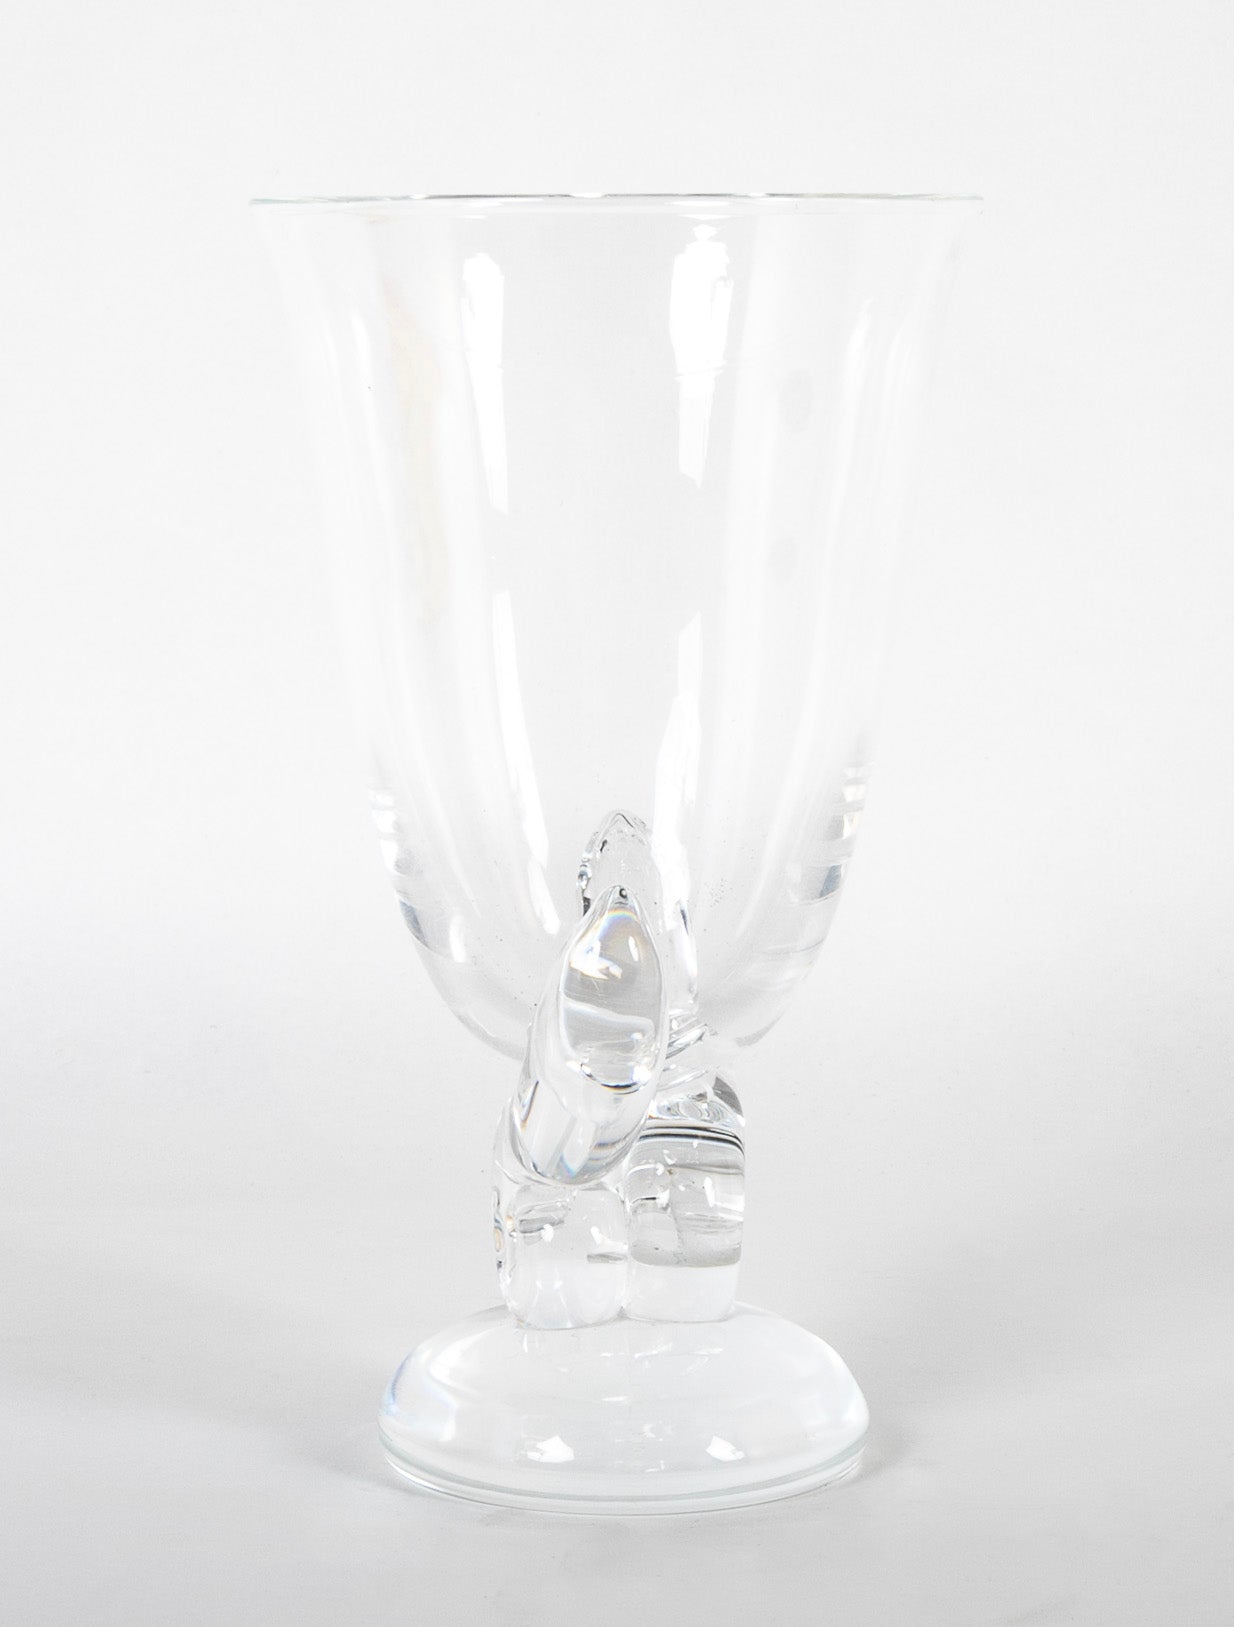 Steuben Glass Vase with Scrolled Circular Base Designed by George Thomas